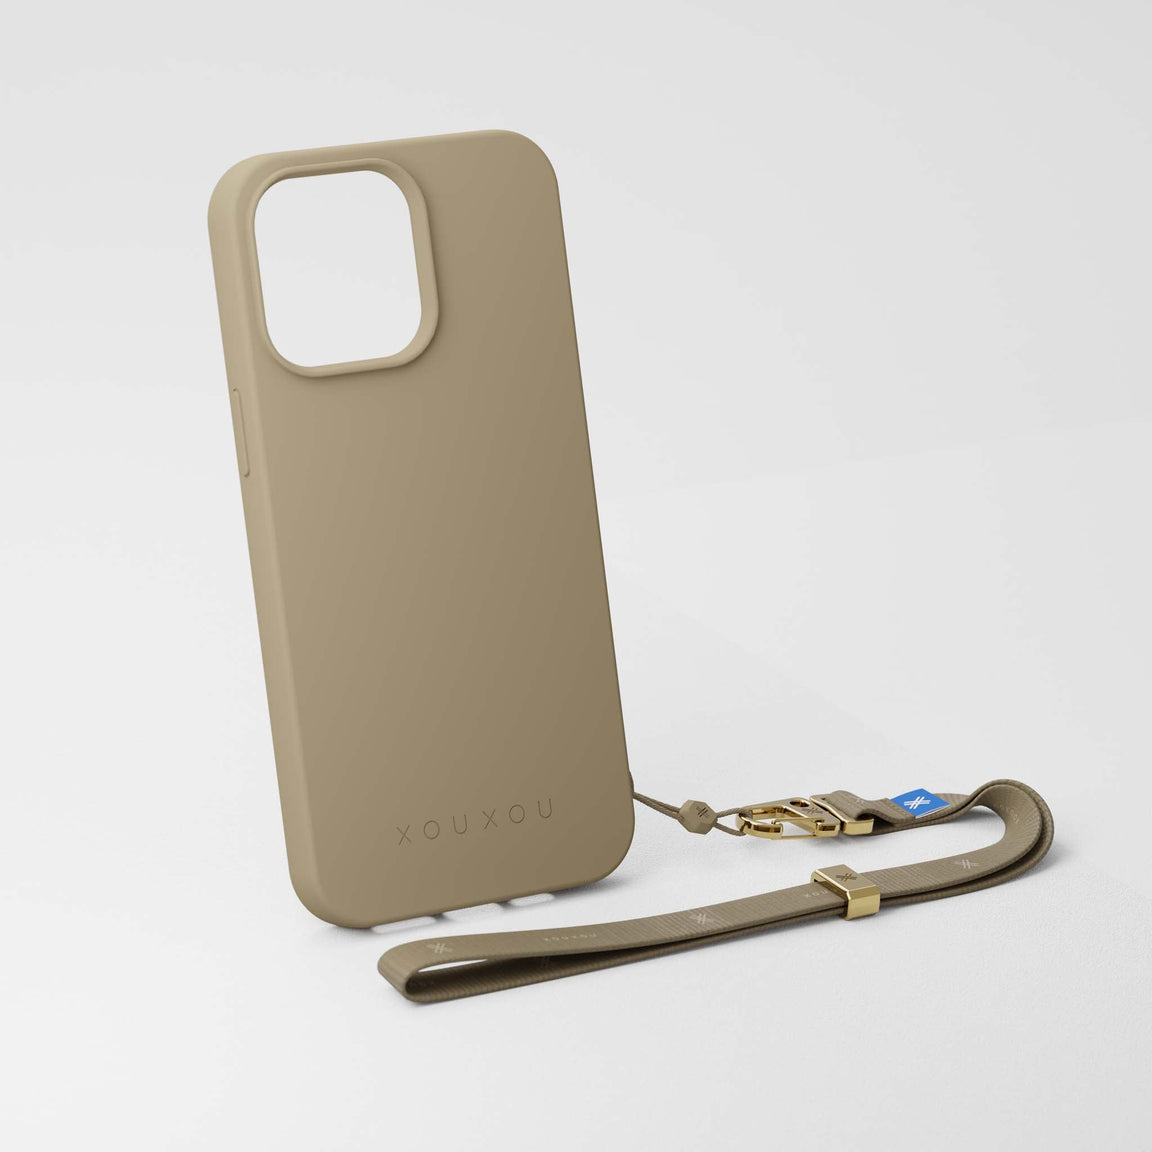 iPhone Case in Taupe Beige with Wrist Strap | XOUXOU